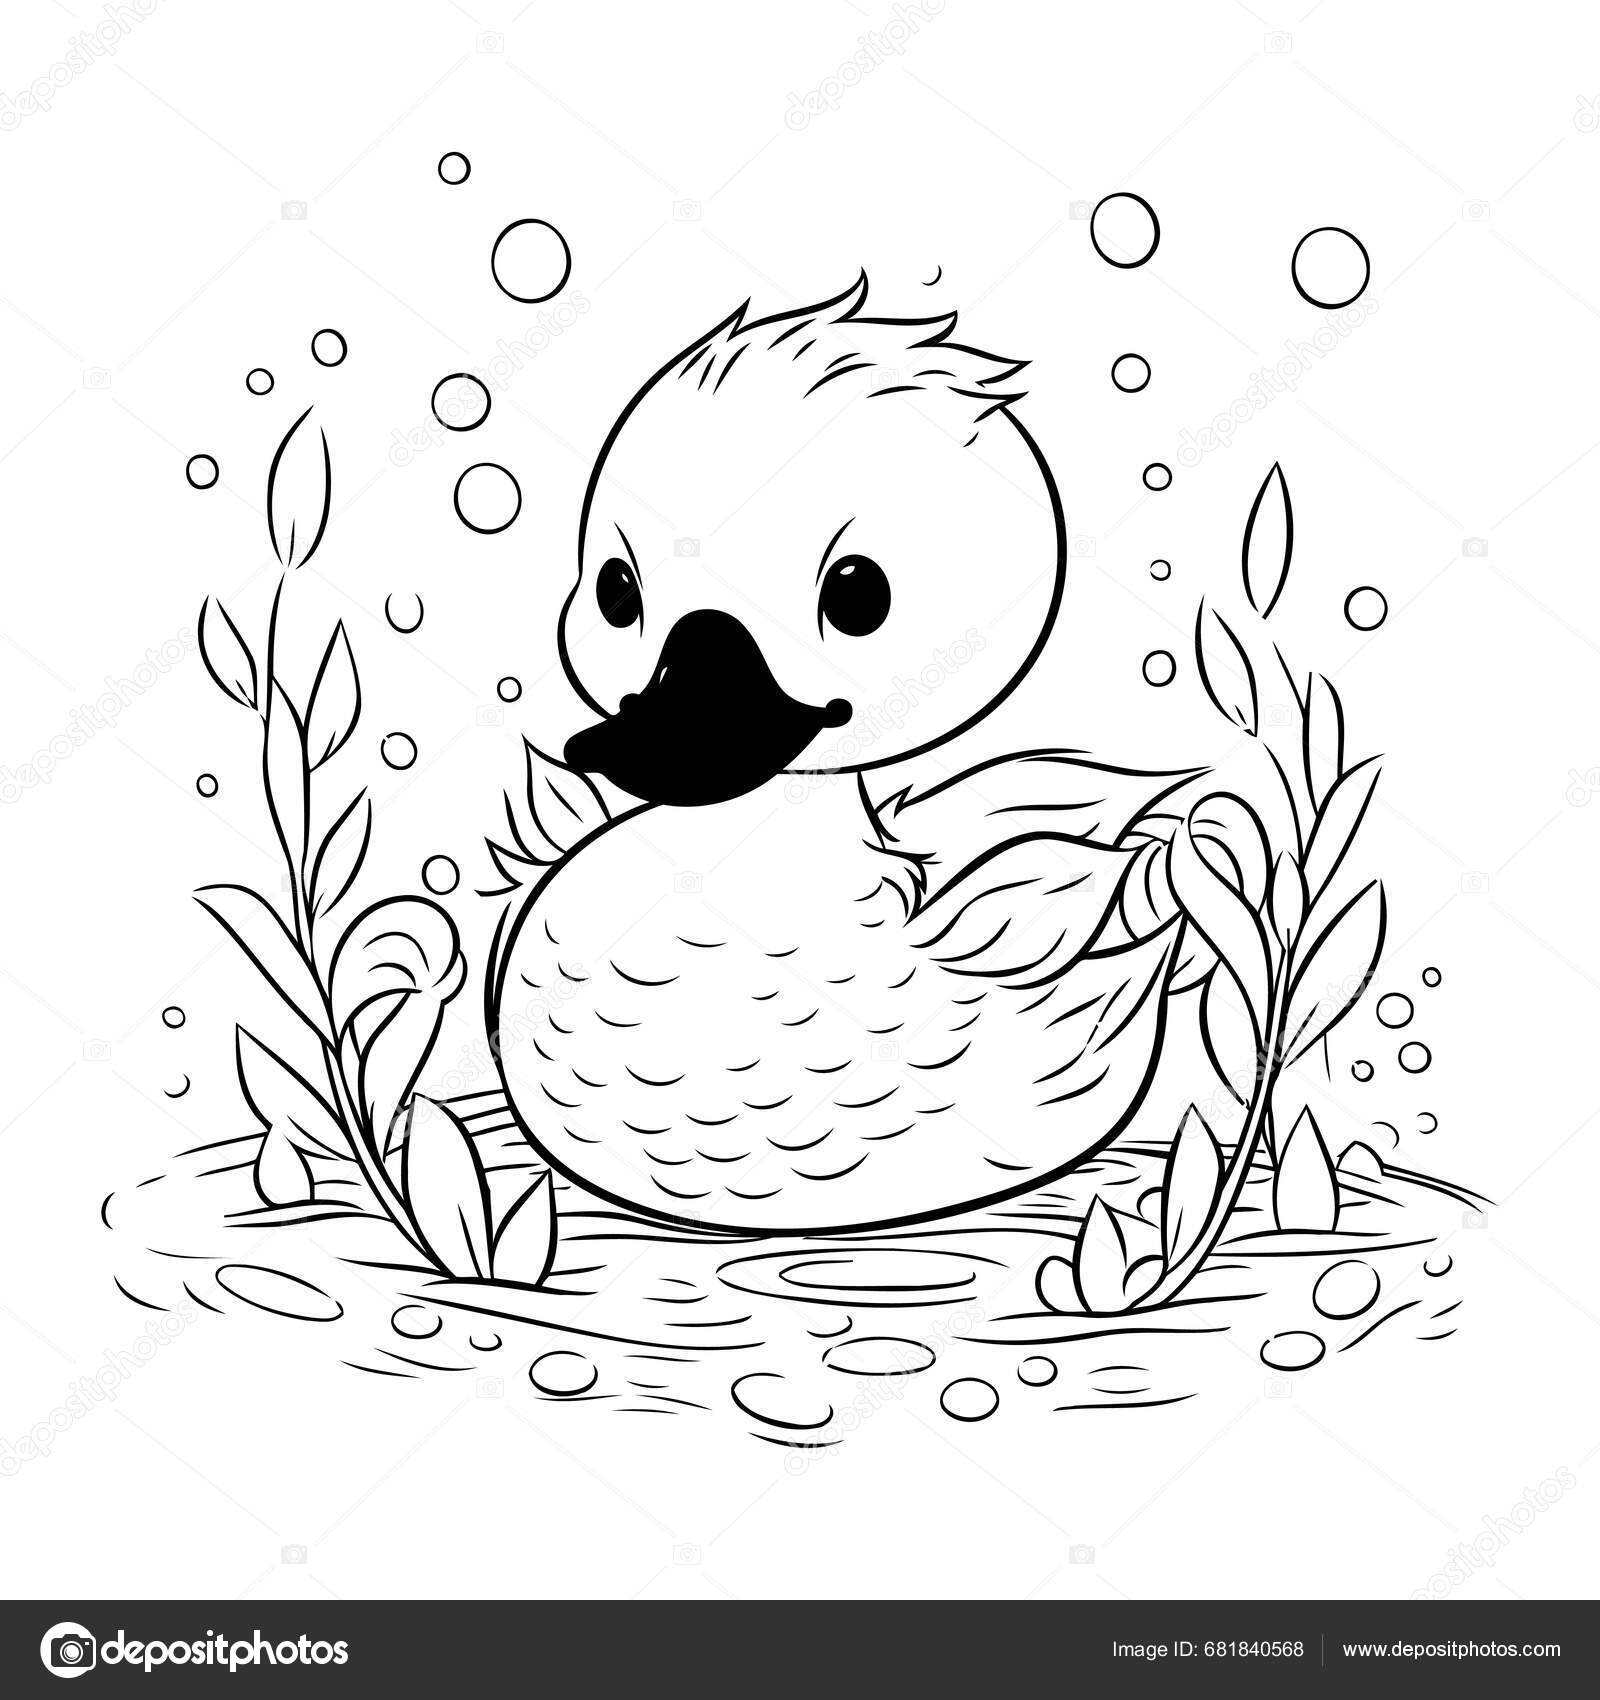 how to draw scenery with duck || swimming duck drawing || scenery for kids  | Drawing scenery, Pond drawing, Duck drawing